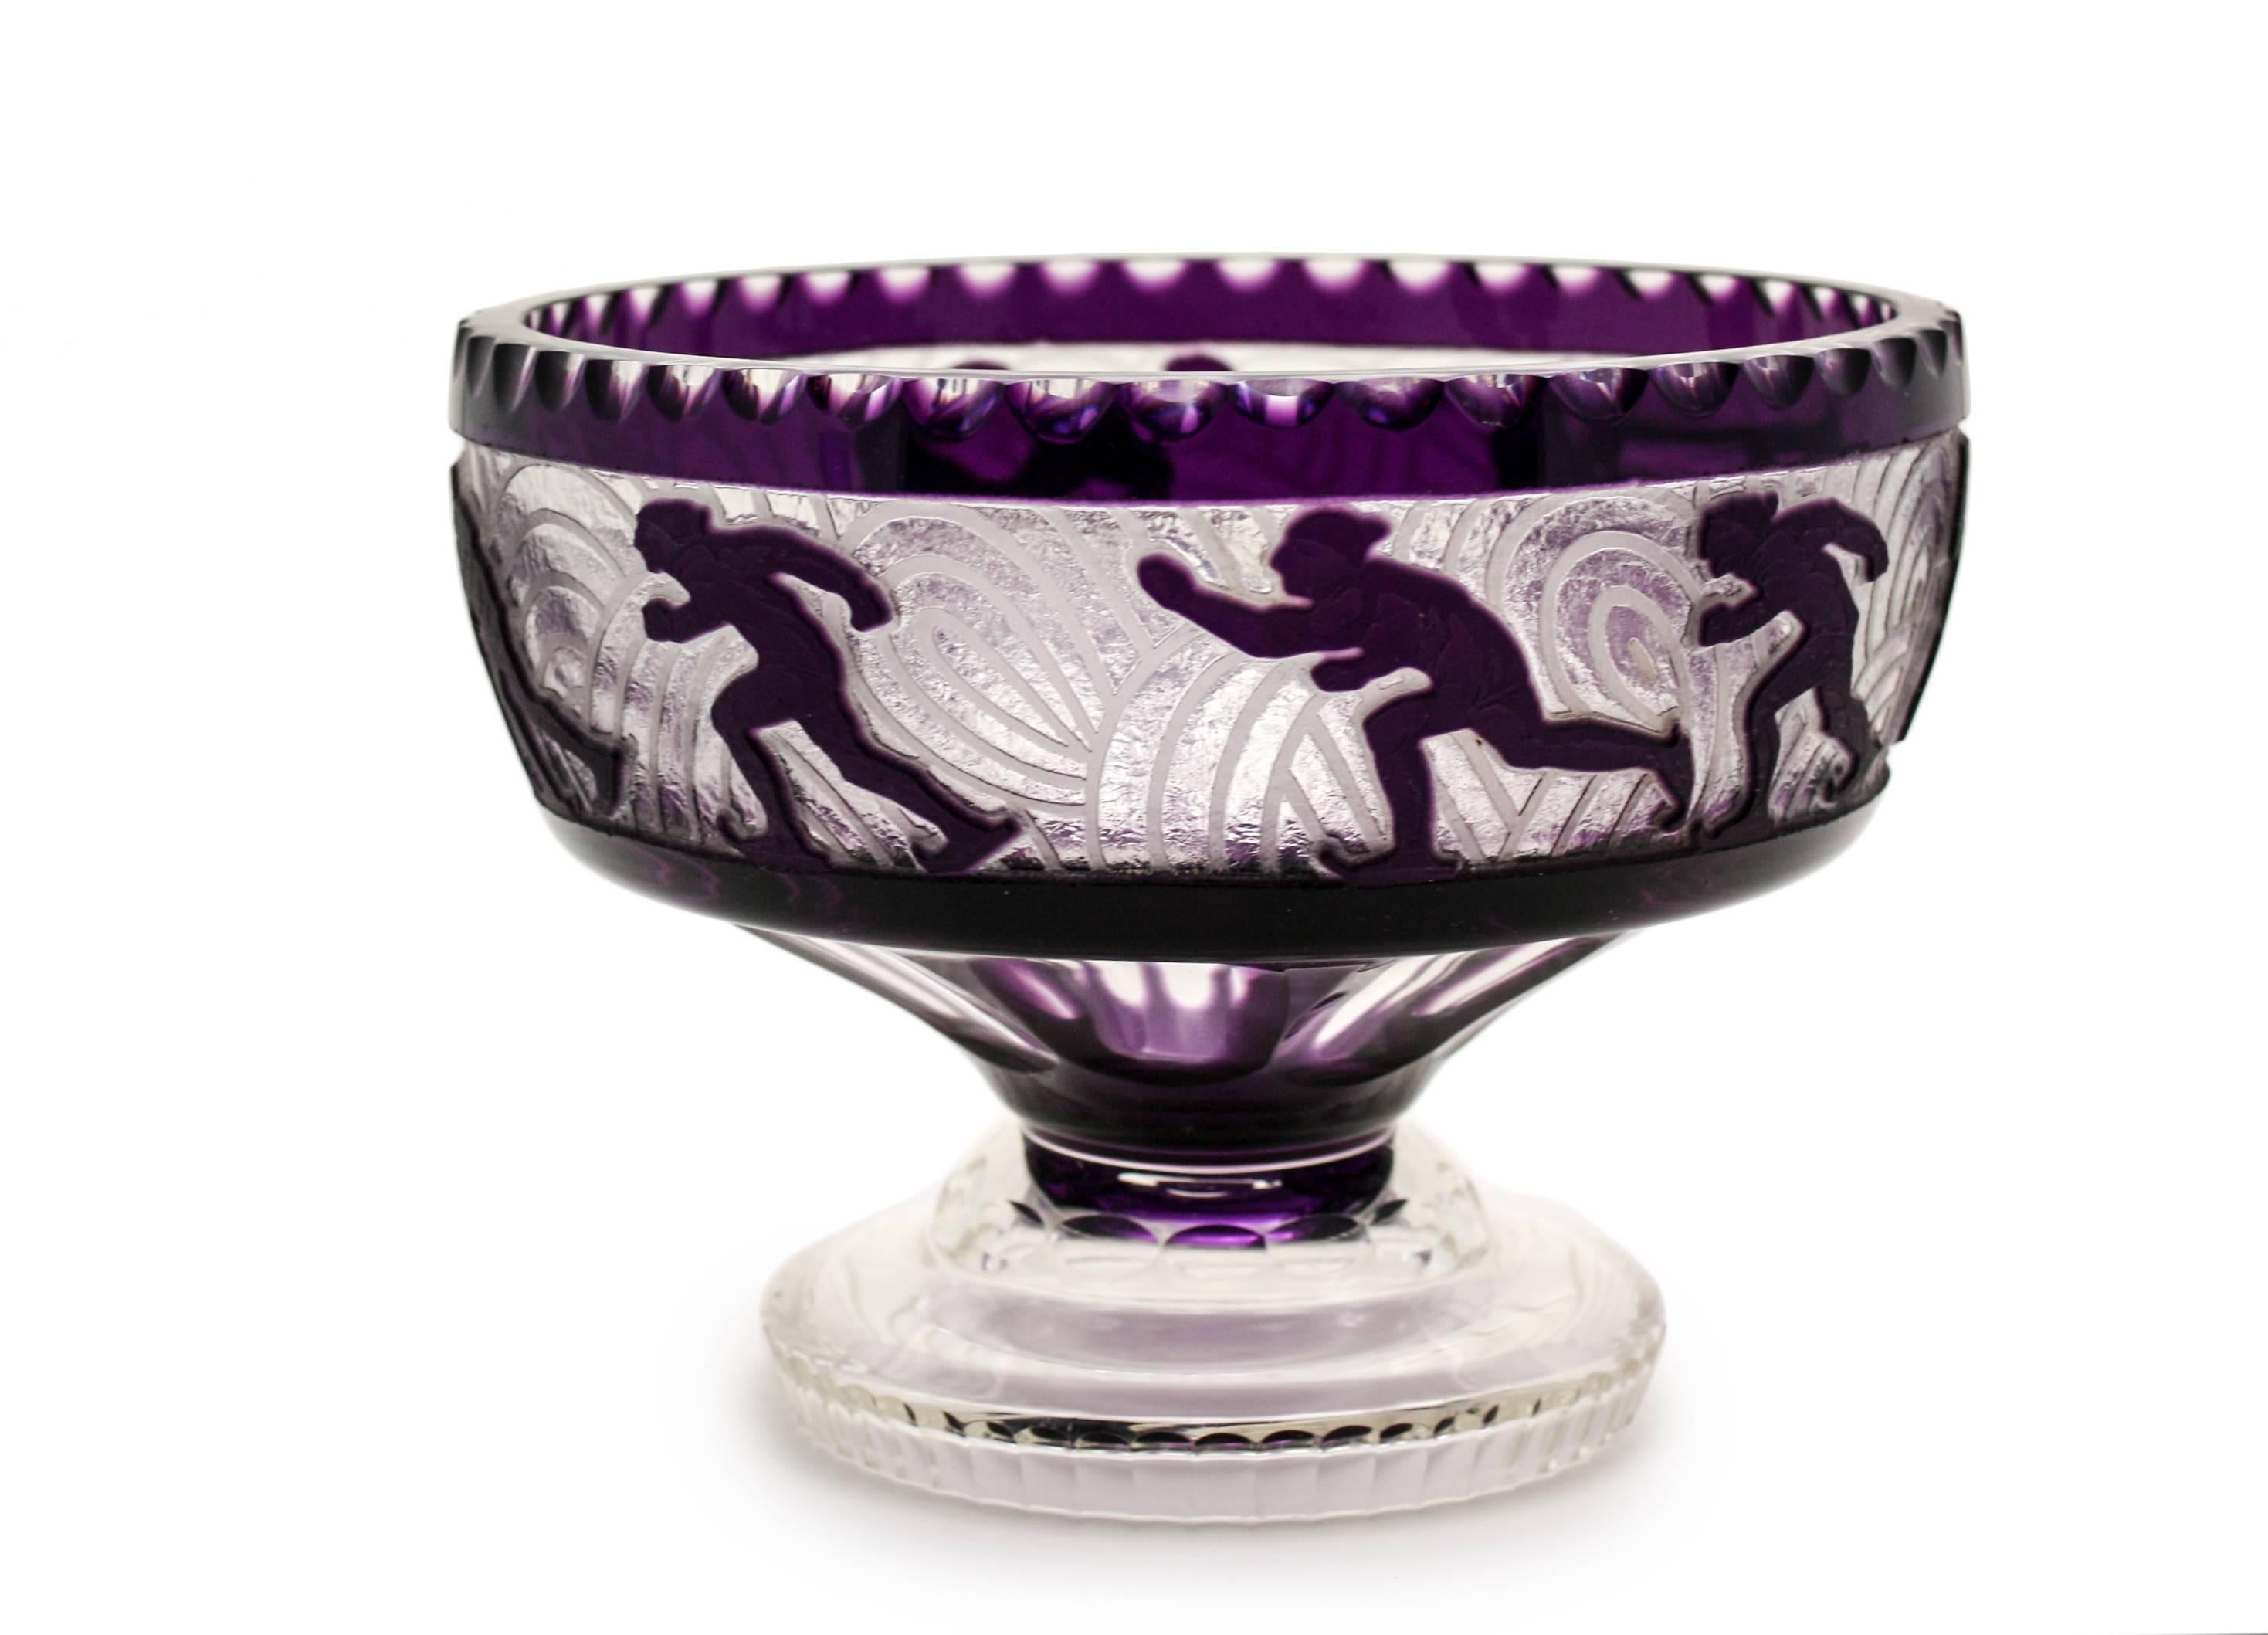 One of the more unusual pieces of Art Deco glass, this footed compote/centerpiece says it all. The thick blank is overlaid with amethyst crystal and cut to clear with a rare skating motif. Clearly designed with a winter motif, the entire perimeter